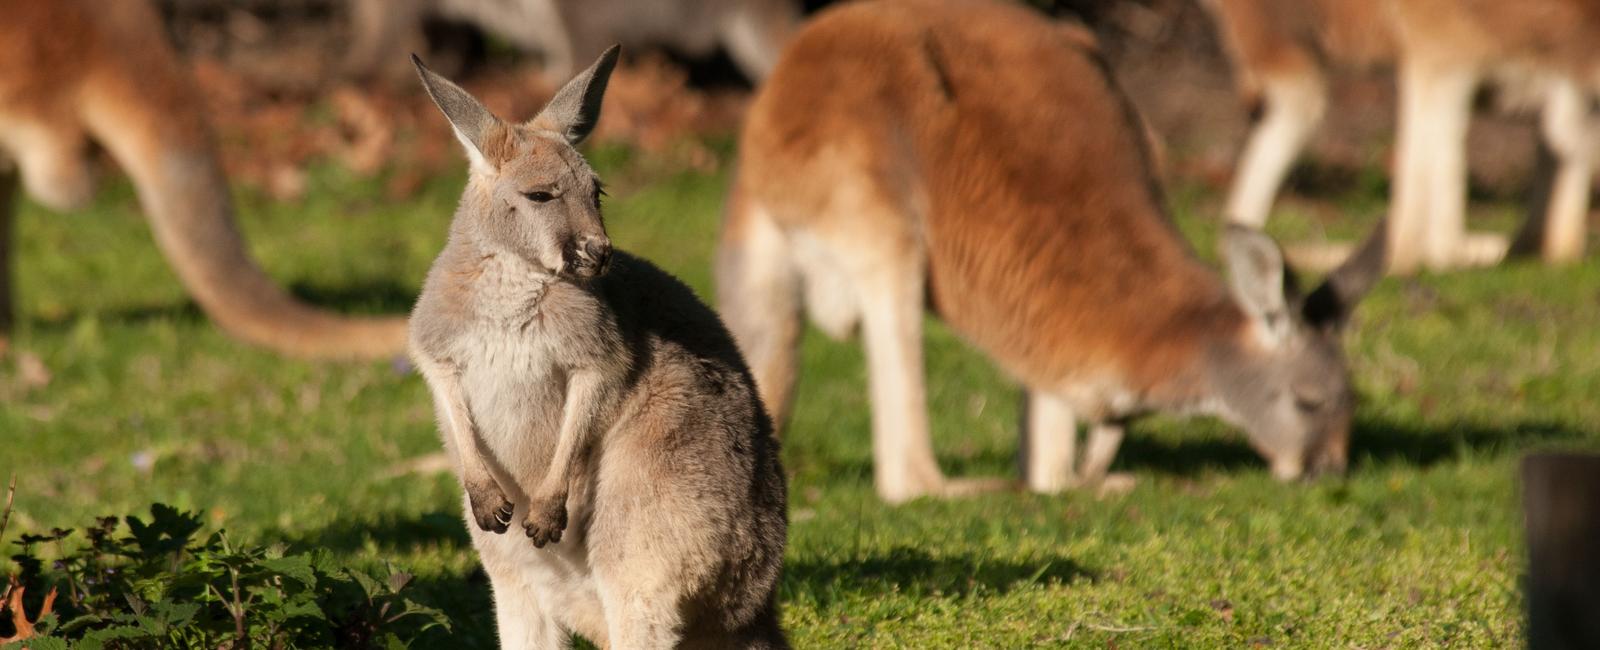 A group of kangaroos is called a mob